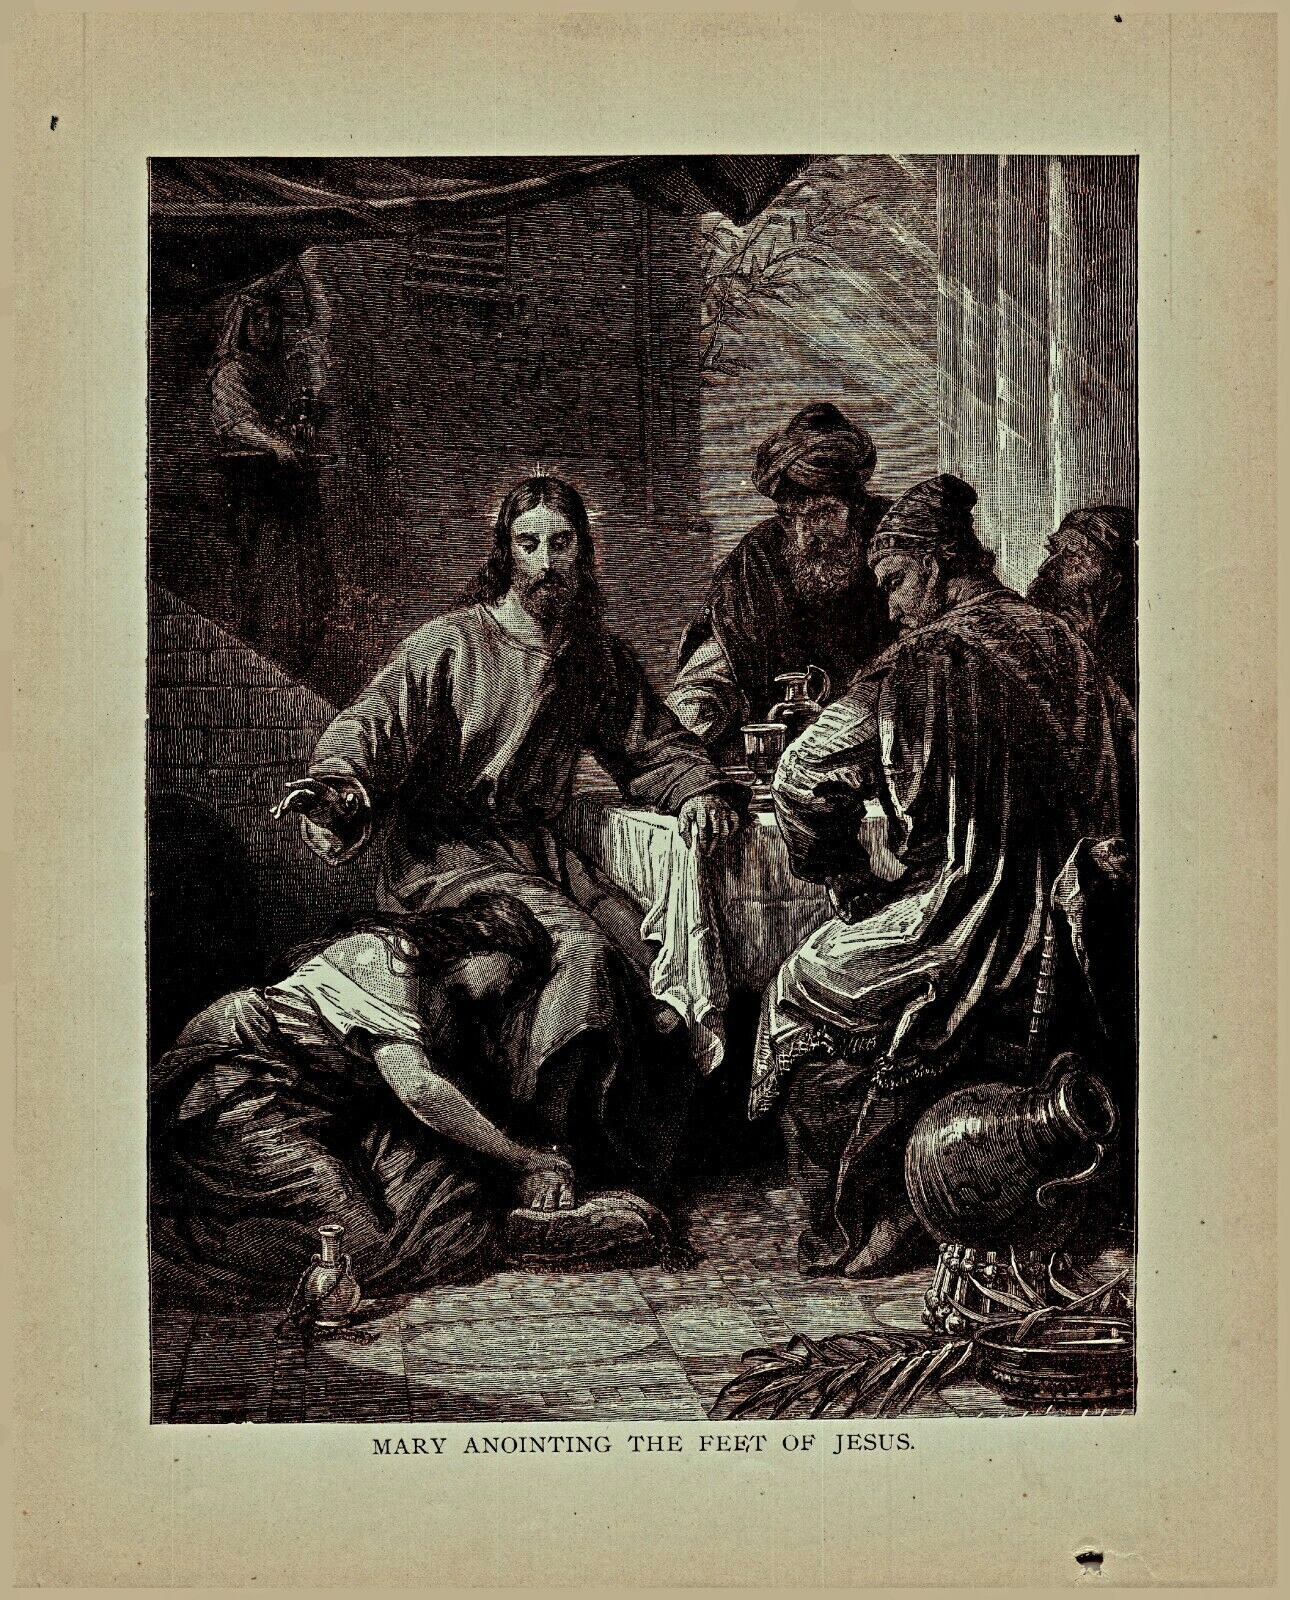 1890 Antique Engraving Mary Anointing Jesus Story Of Jesus 8 X 10 Collectible